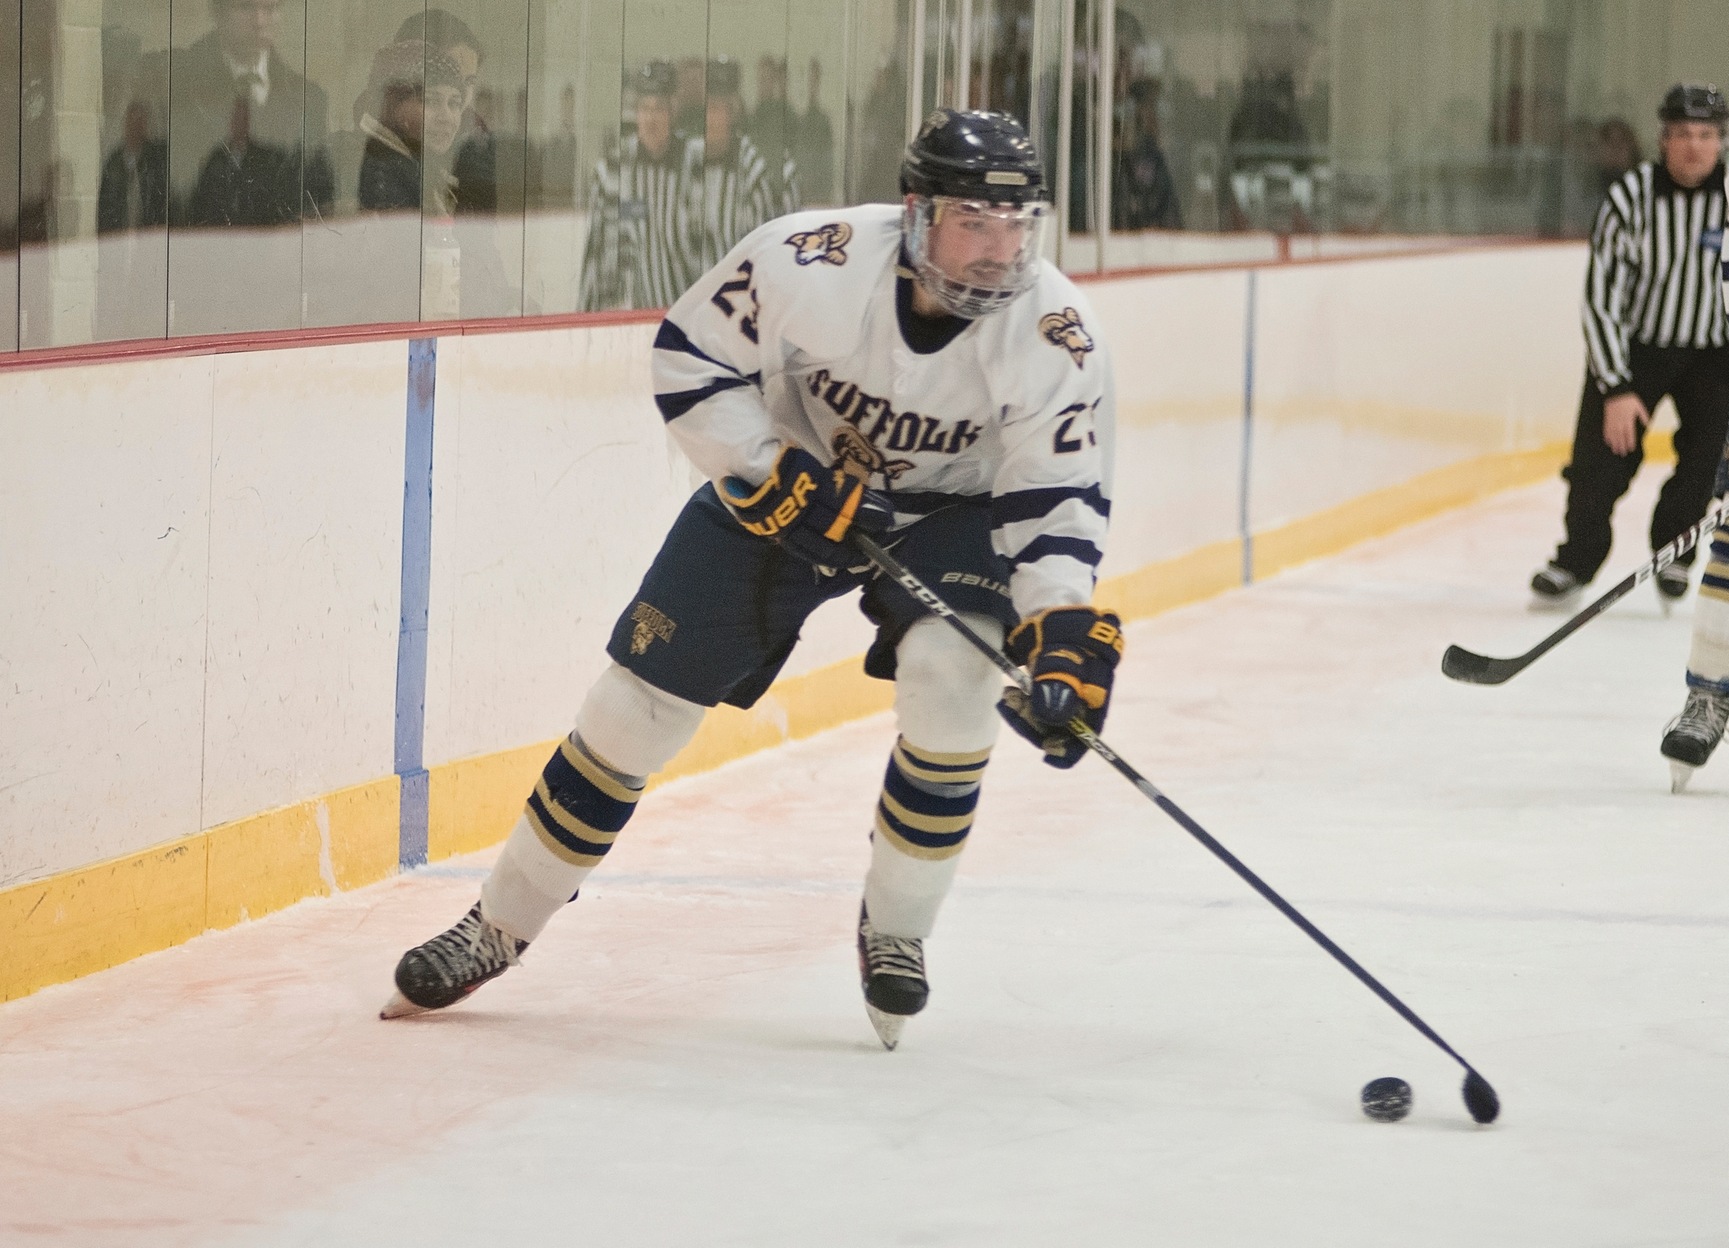 Miller’s Goal Lifts Men’s Hockey Past Wentworth, 1-0